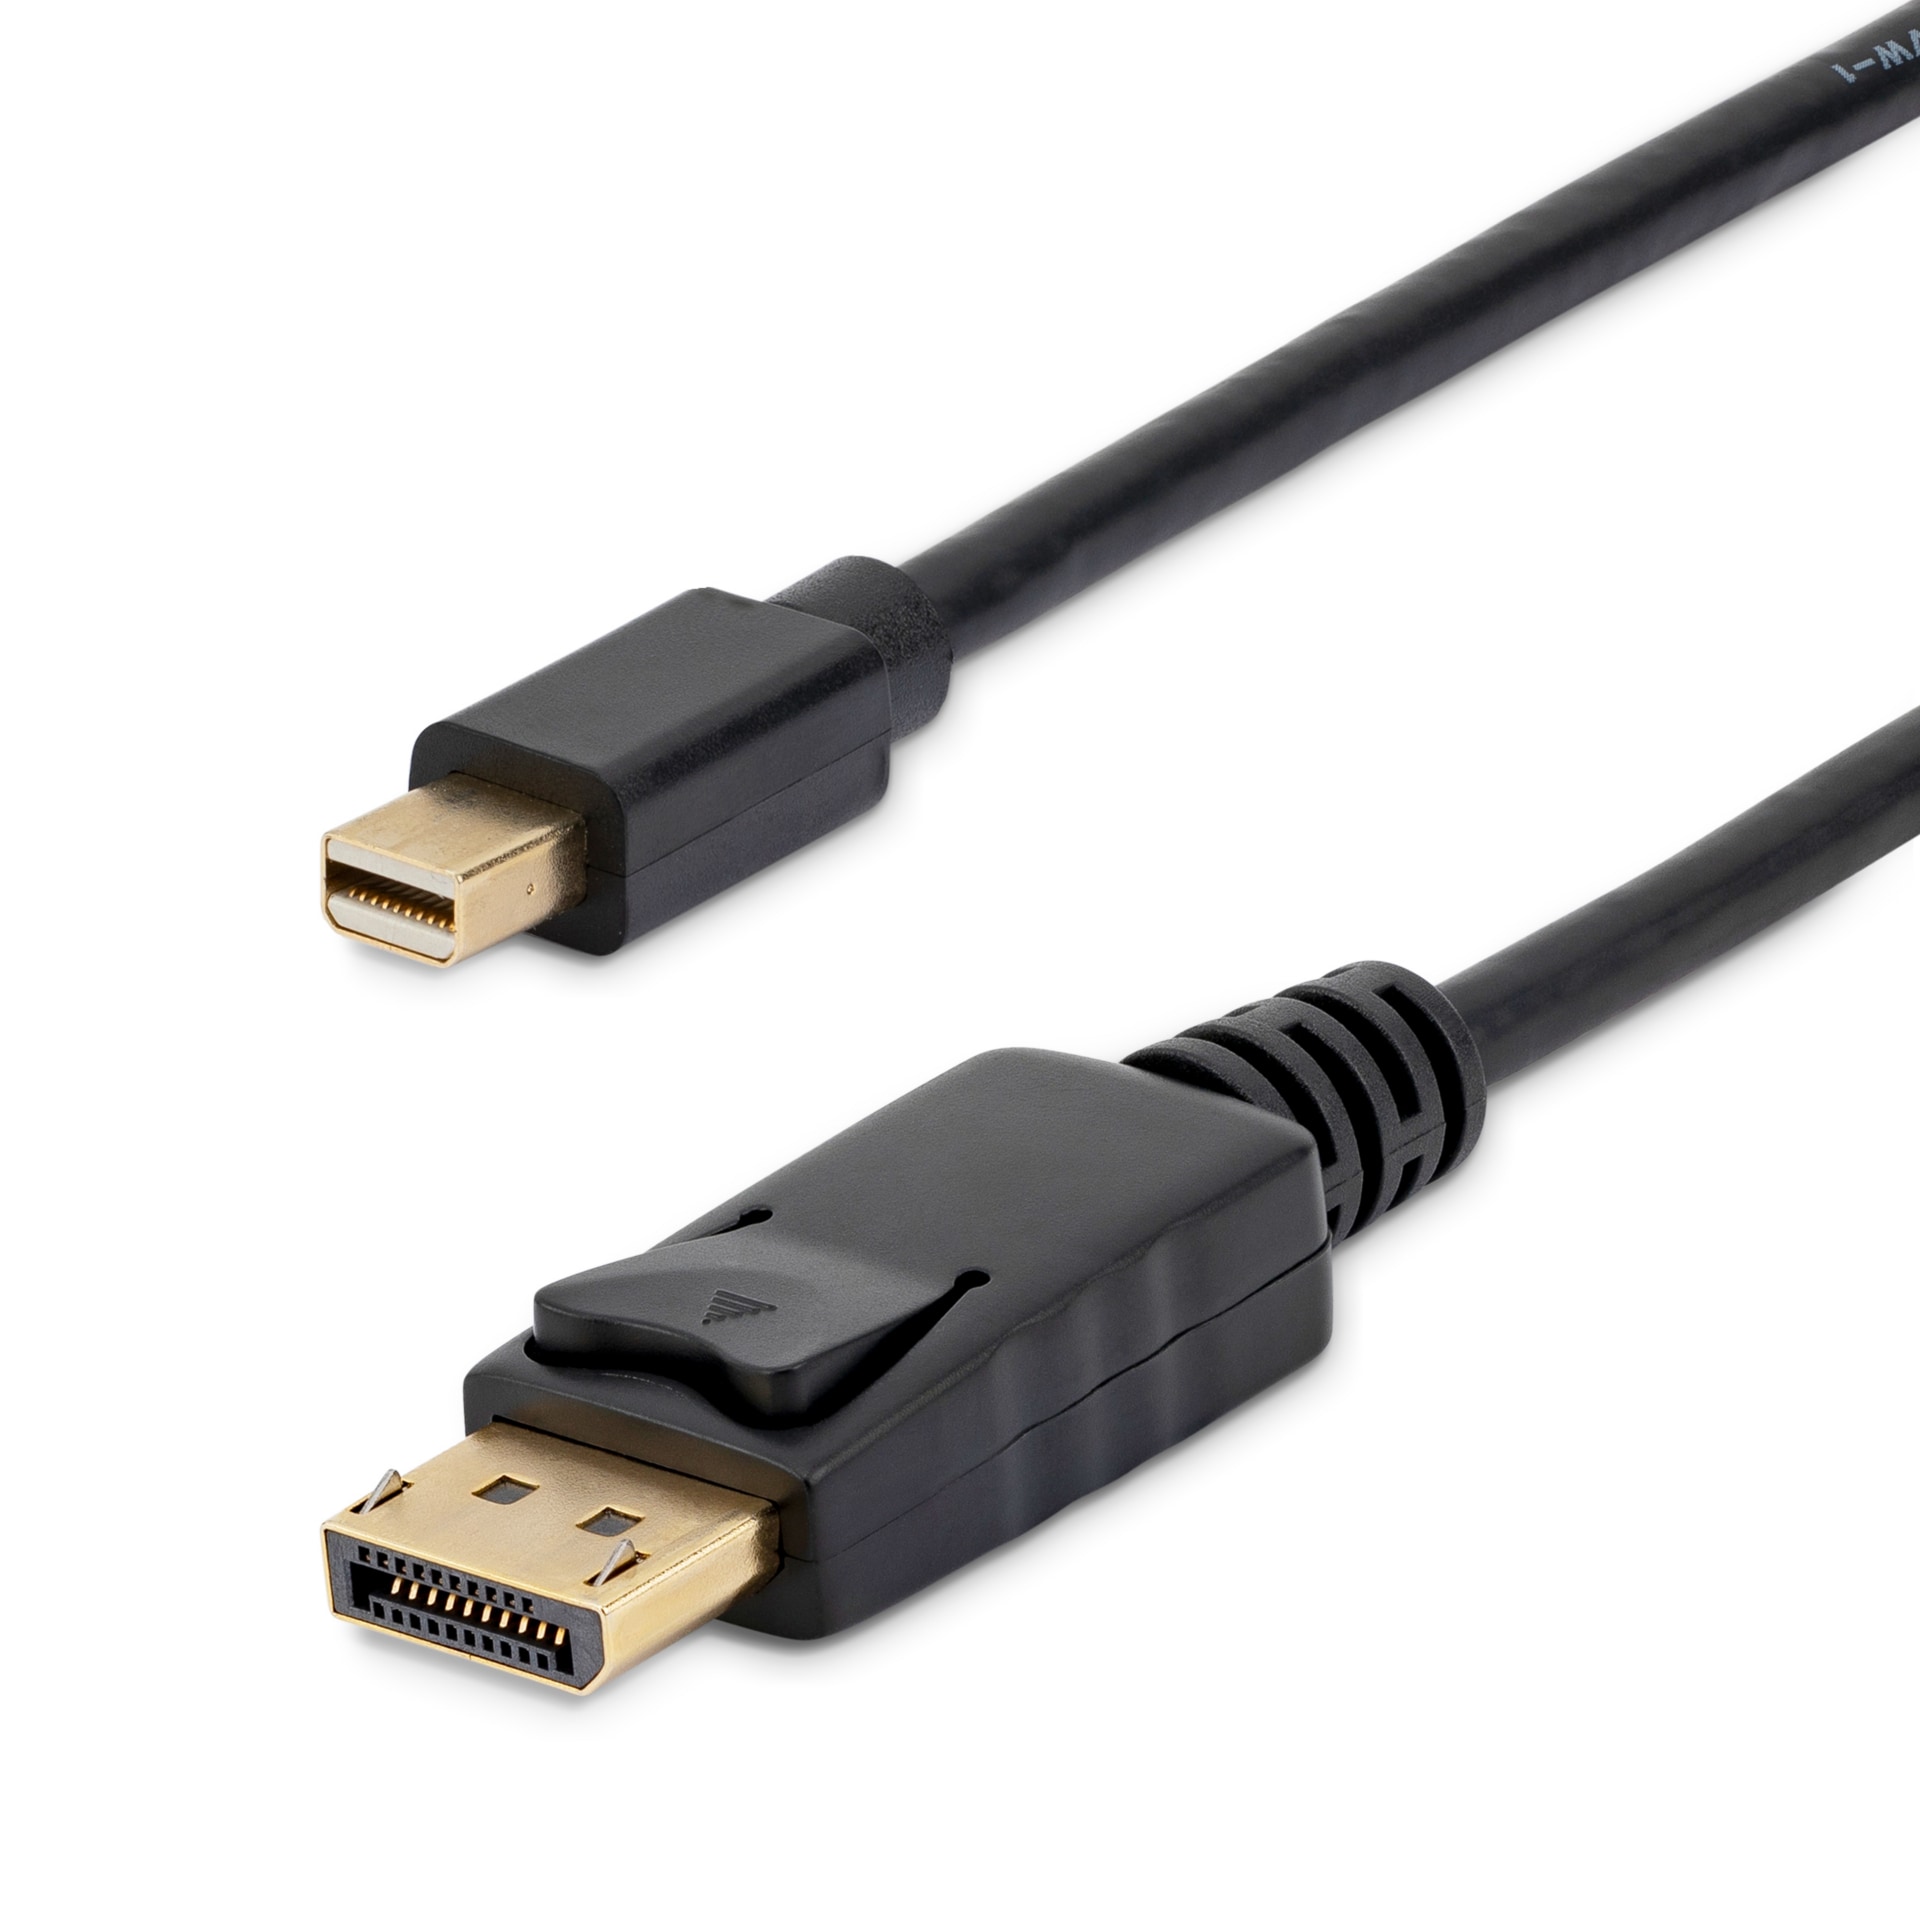 StarTech.com 6ft Mini DisplayPort to DisplayPort 1.2 Cable - 4K x 2K mDP to  DP Adapter Cable - MDP2DPMM6 - Monitor Cables & Adapters 